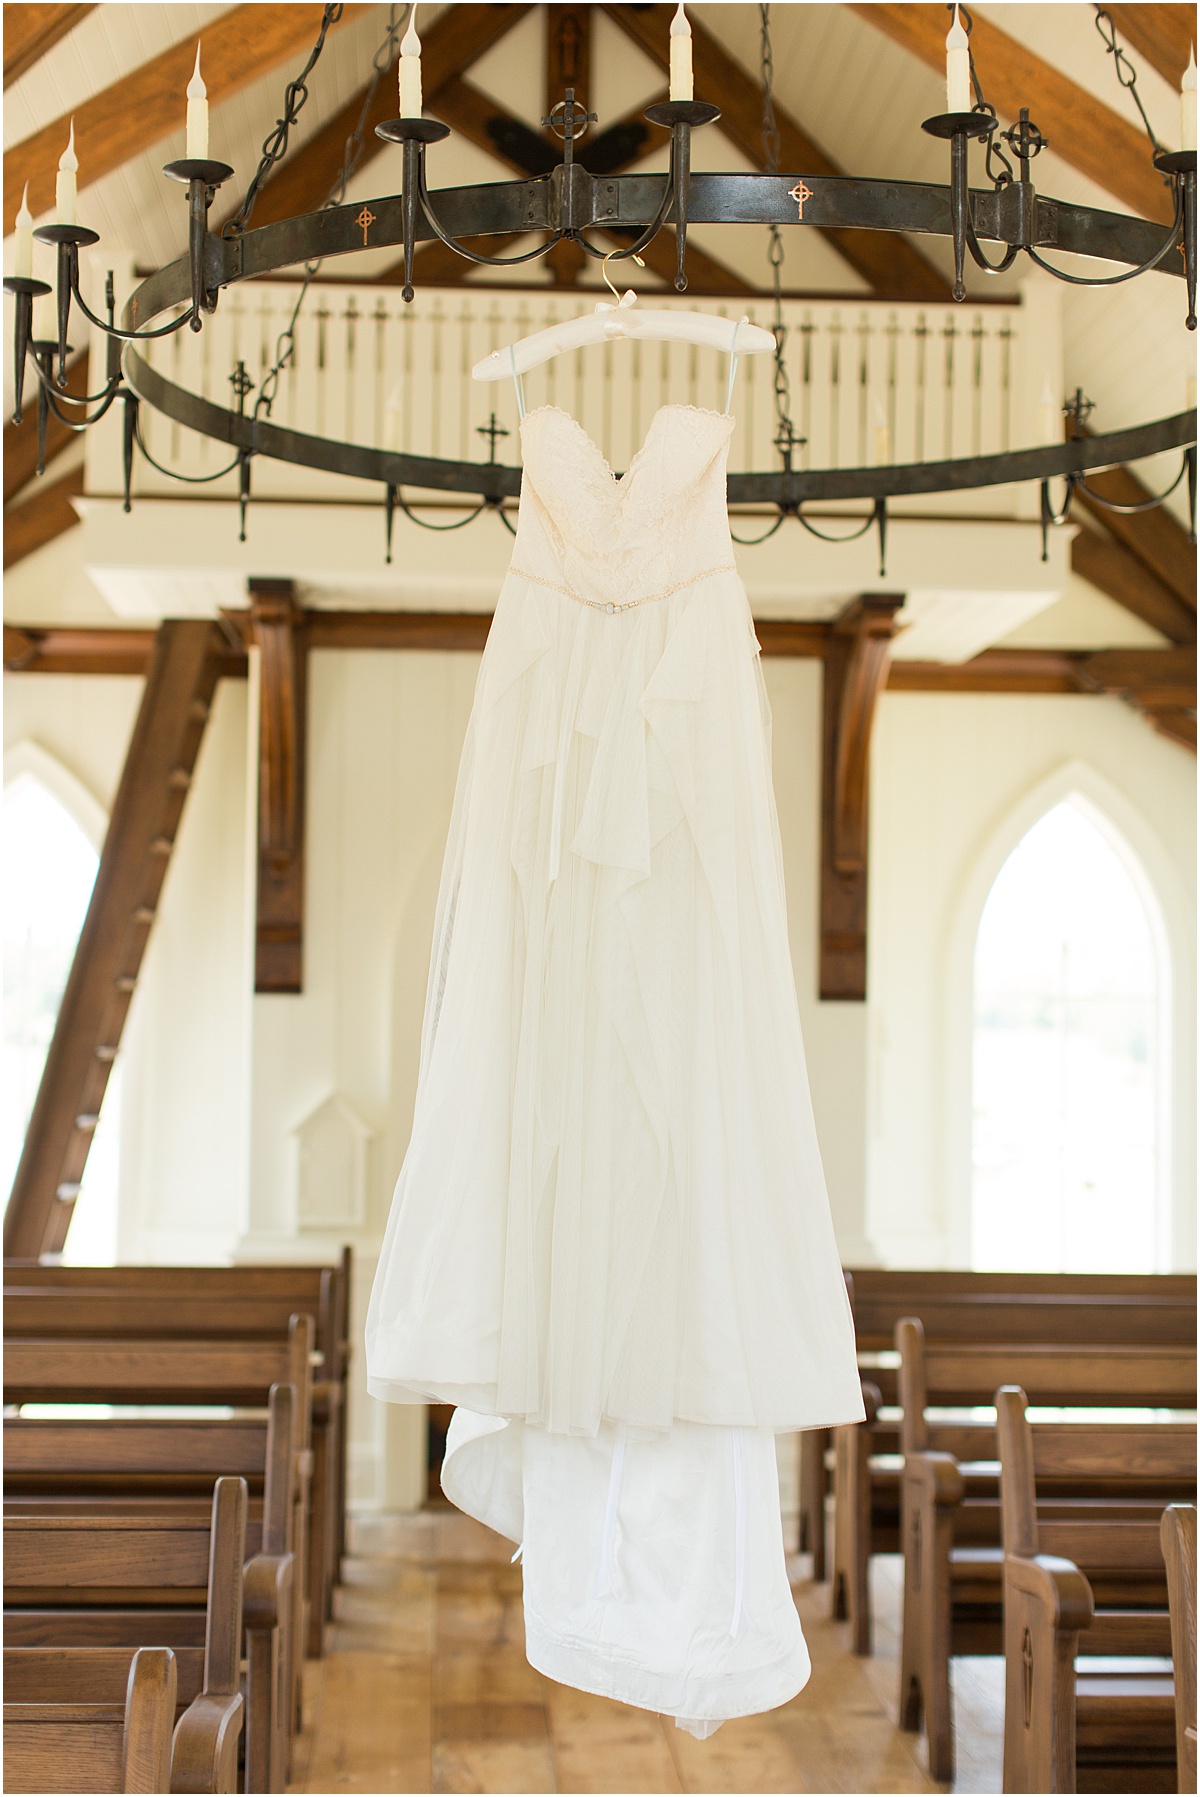 White wedding dress hanging from an iron chandelier in a white chapel